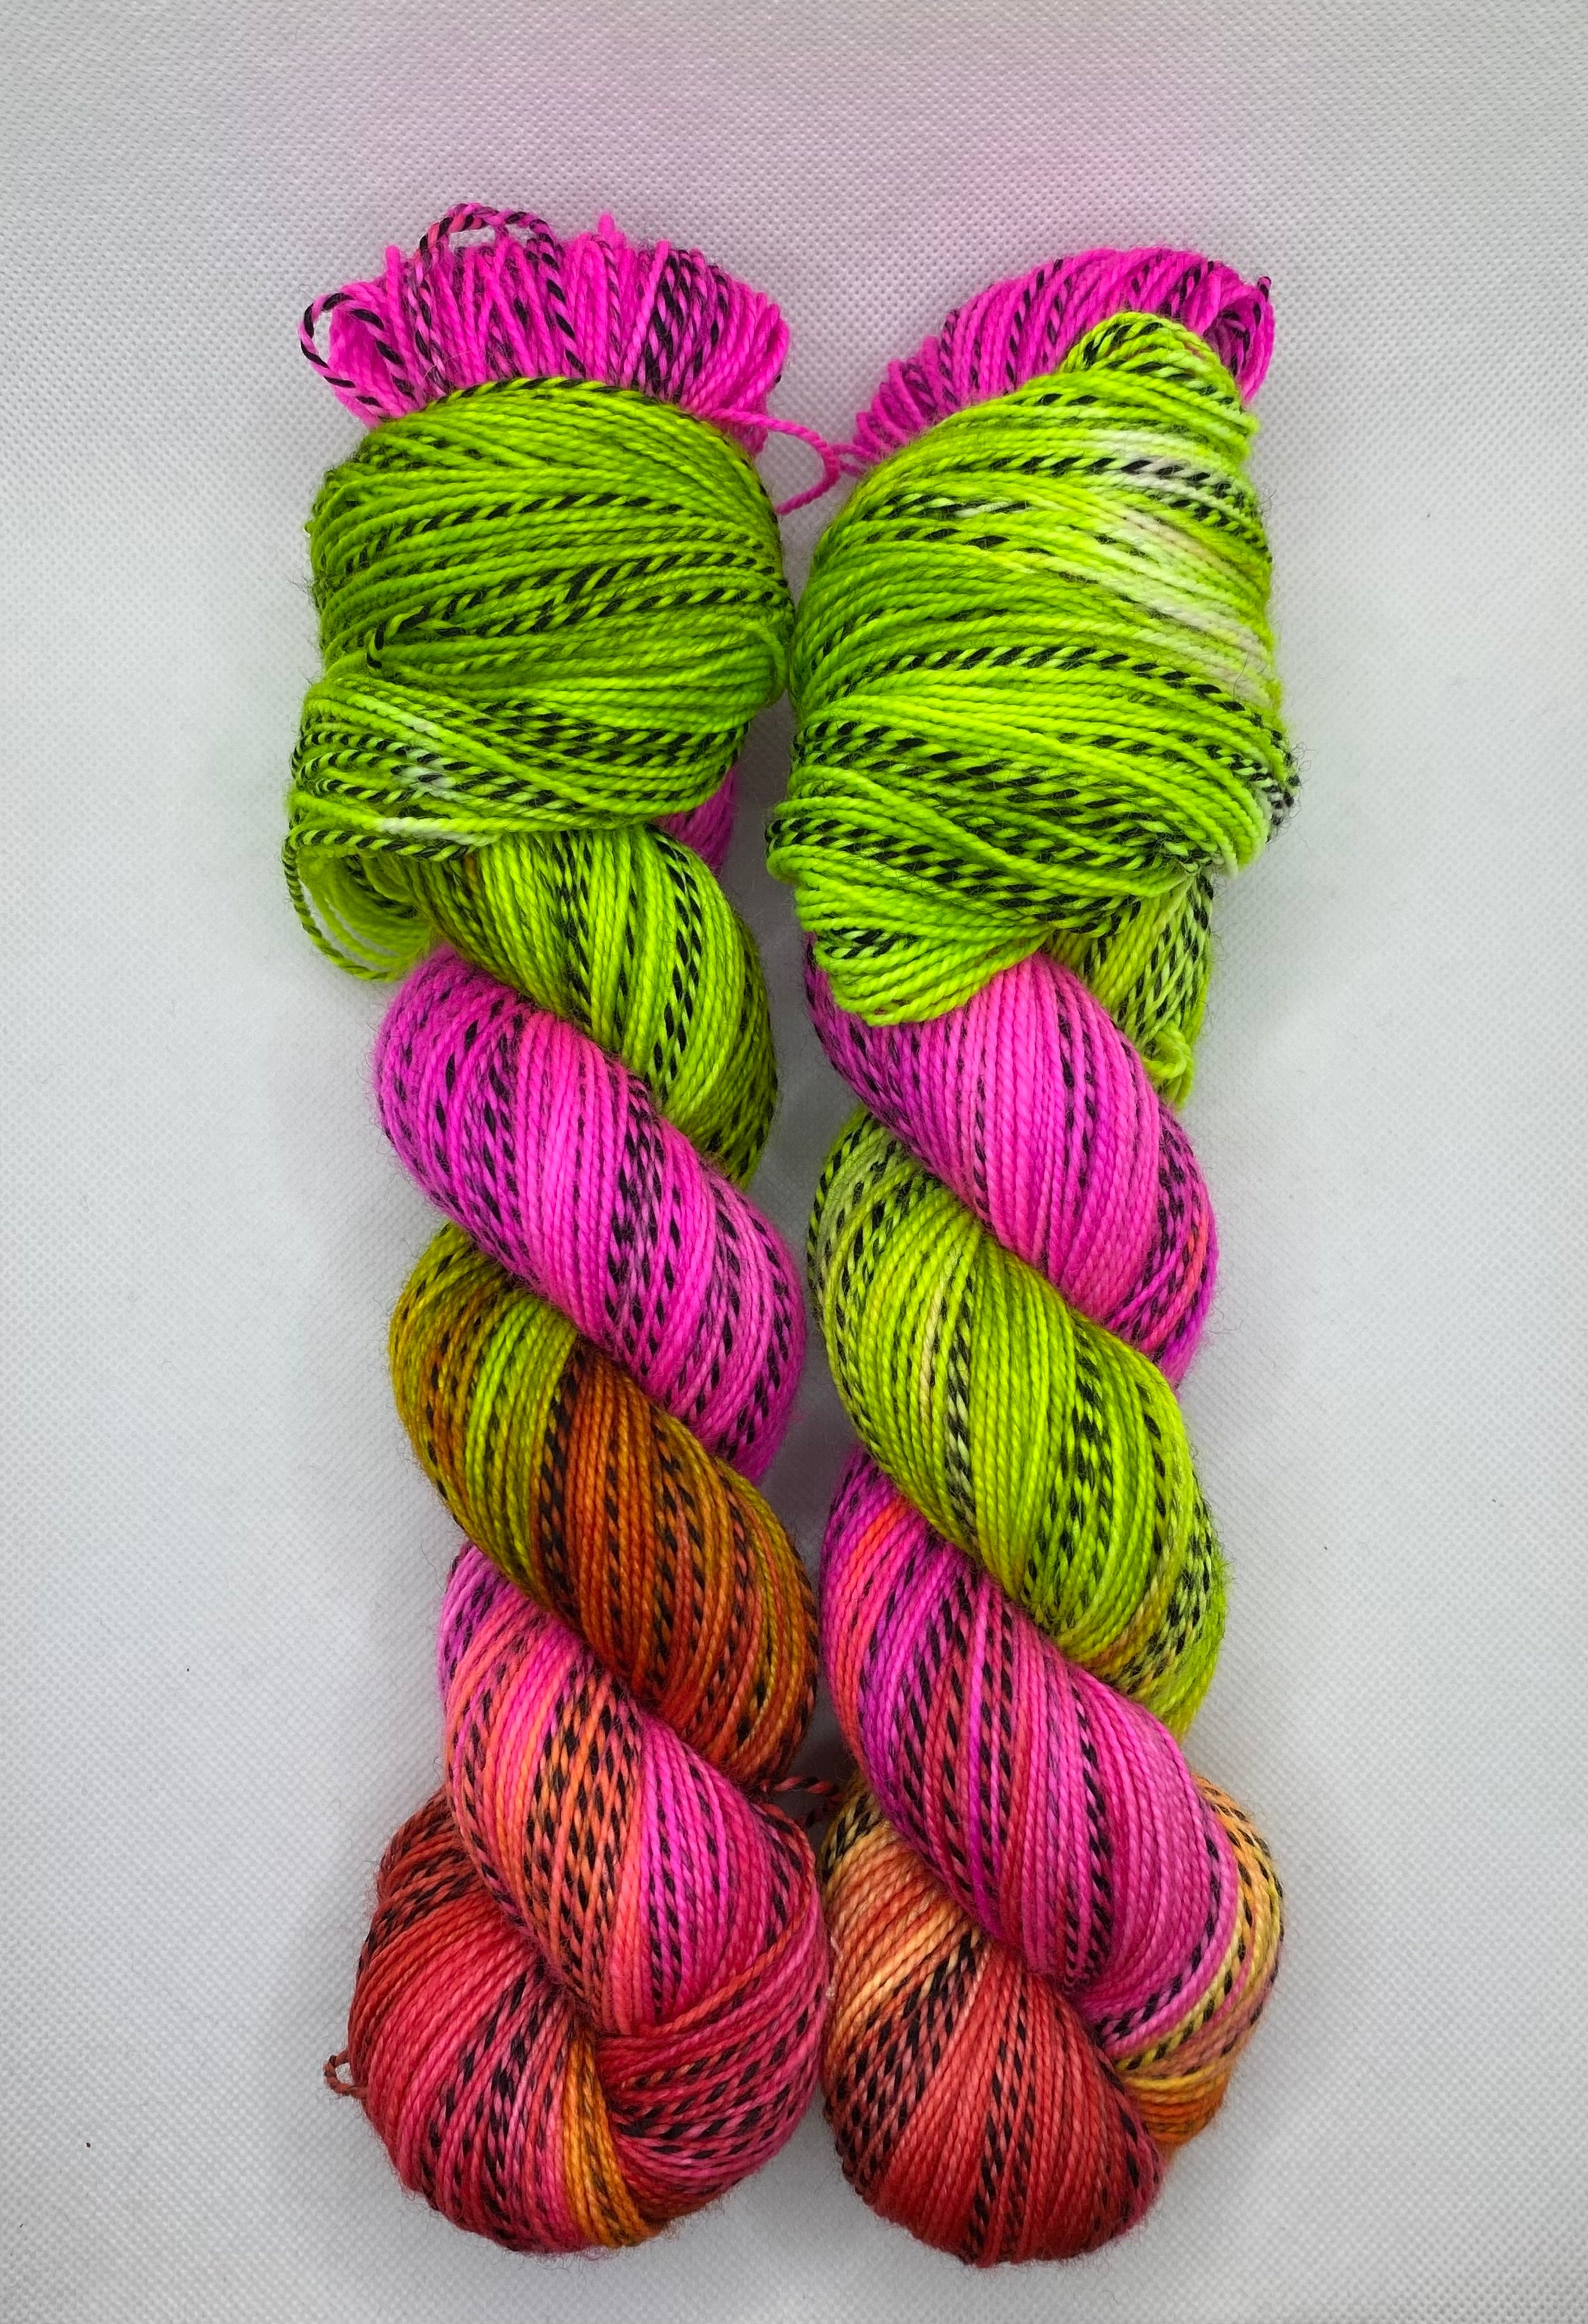 “Summer Melon” One of a Kind Hand Dyed Yarn